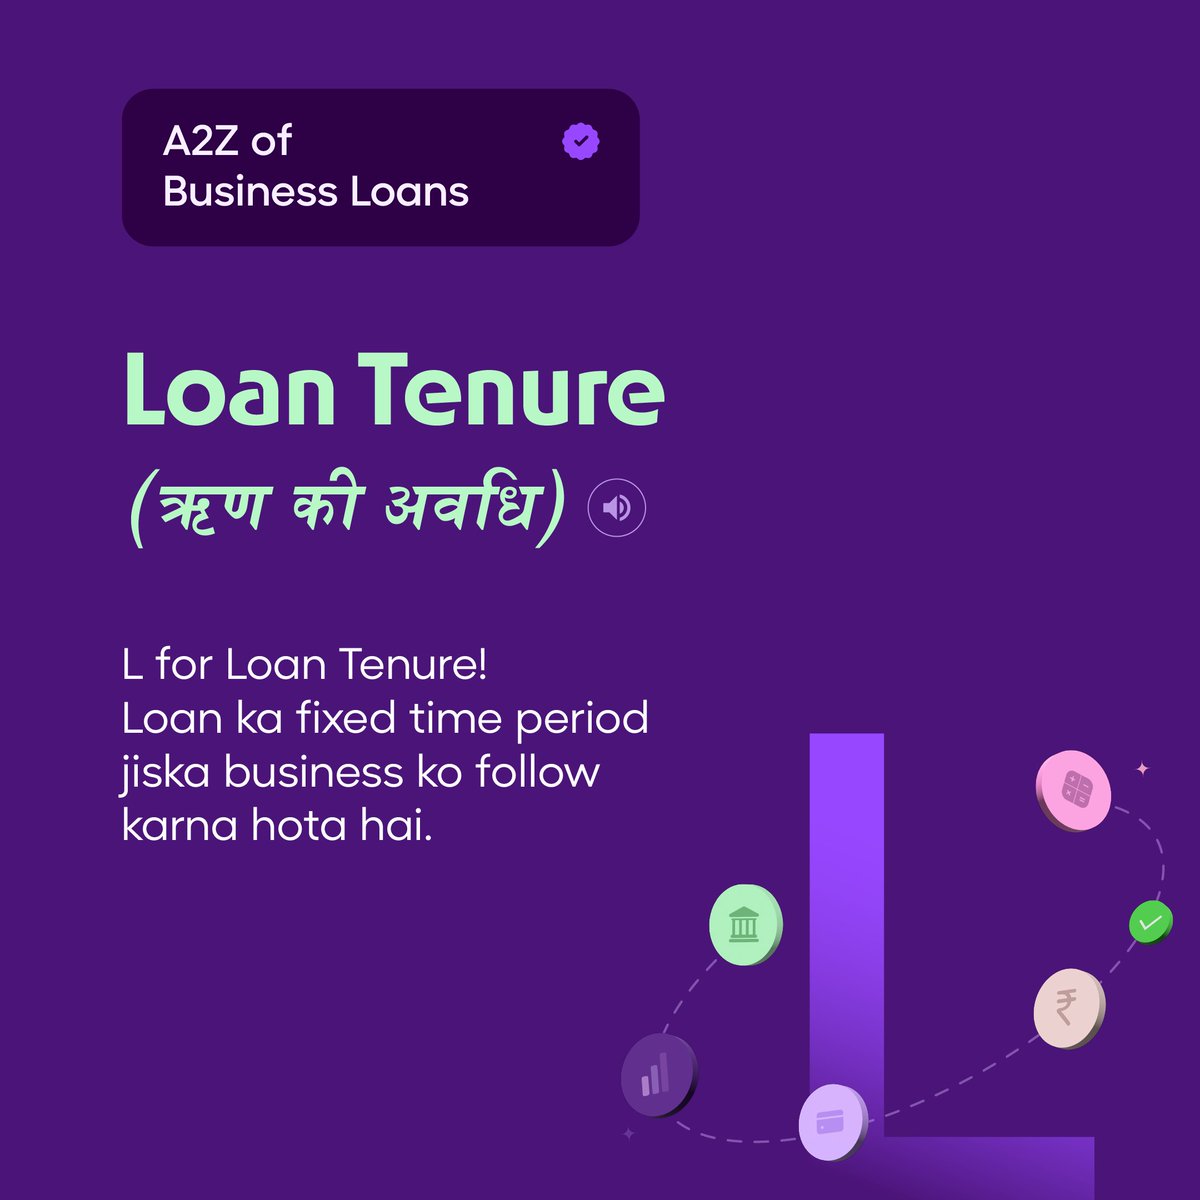 Here's another set of business loan jargon simplified! Understanding the terms can help you as a business owner assess the terms of the loan better.

Stay tuned for more.

#businessloans #msmebusinesses #msmeloan #collateralfreeloan #opencapital